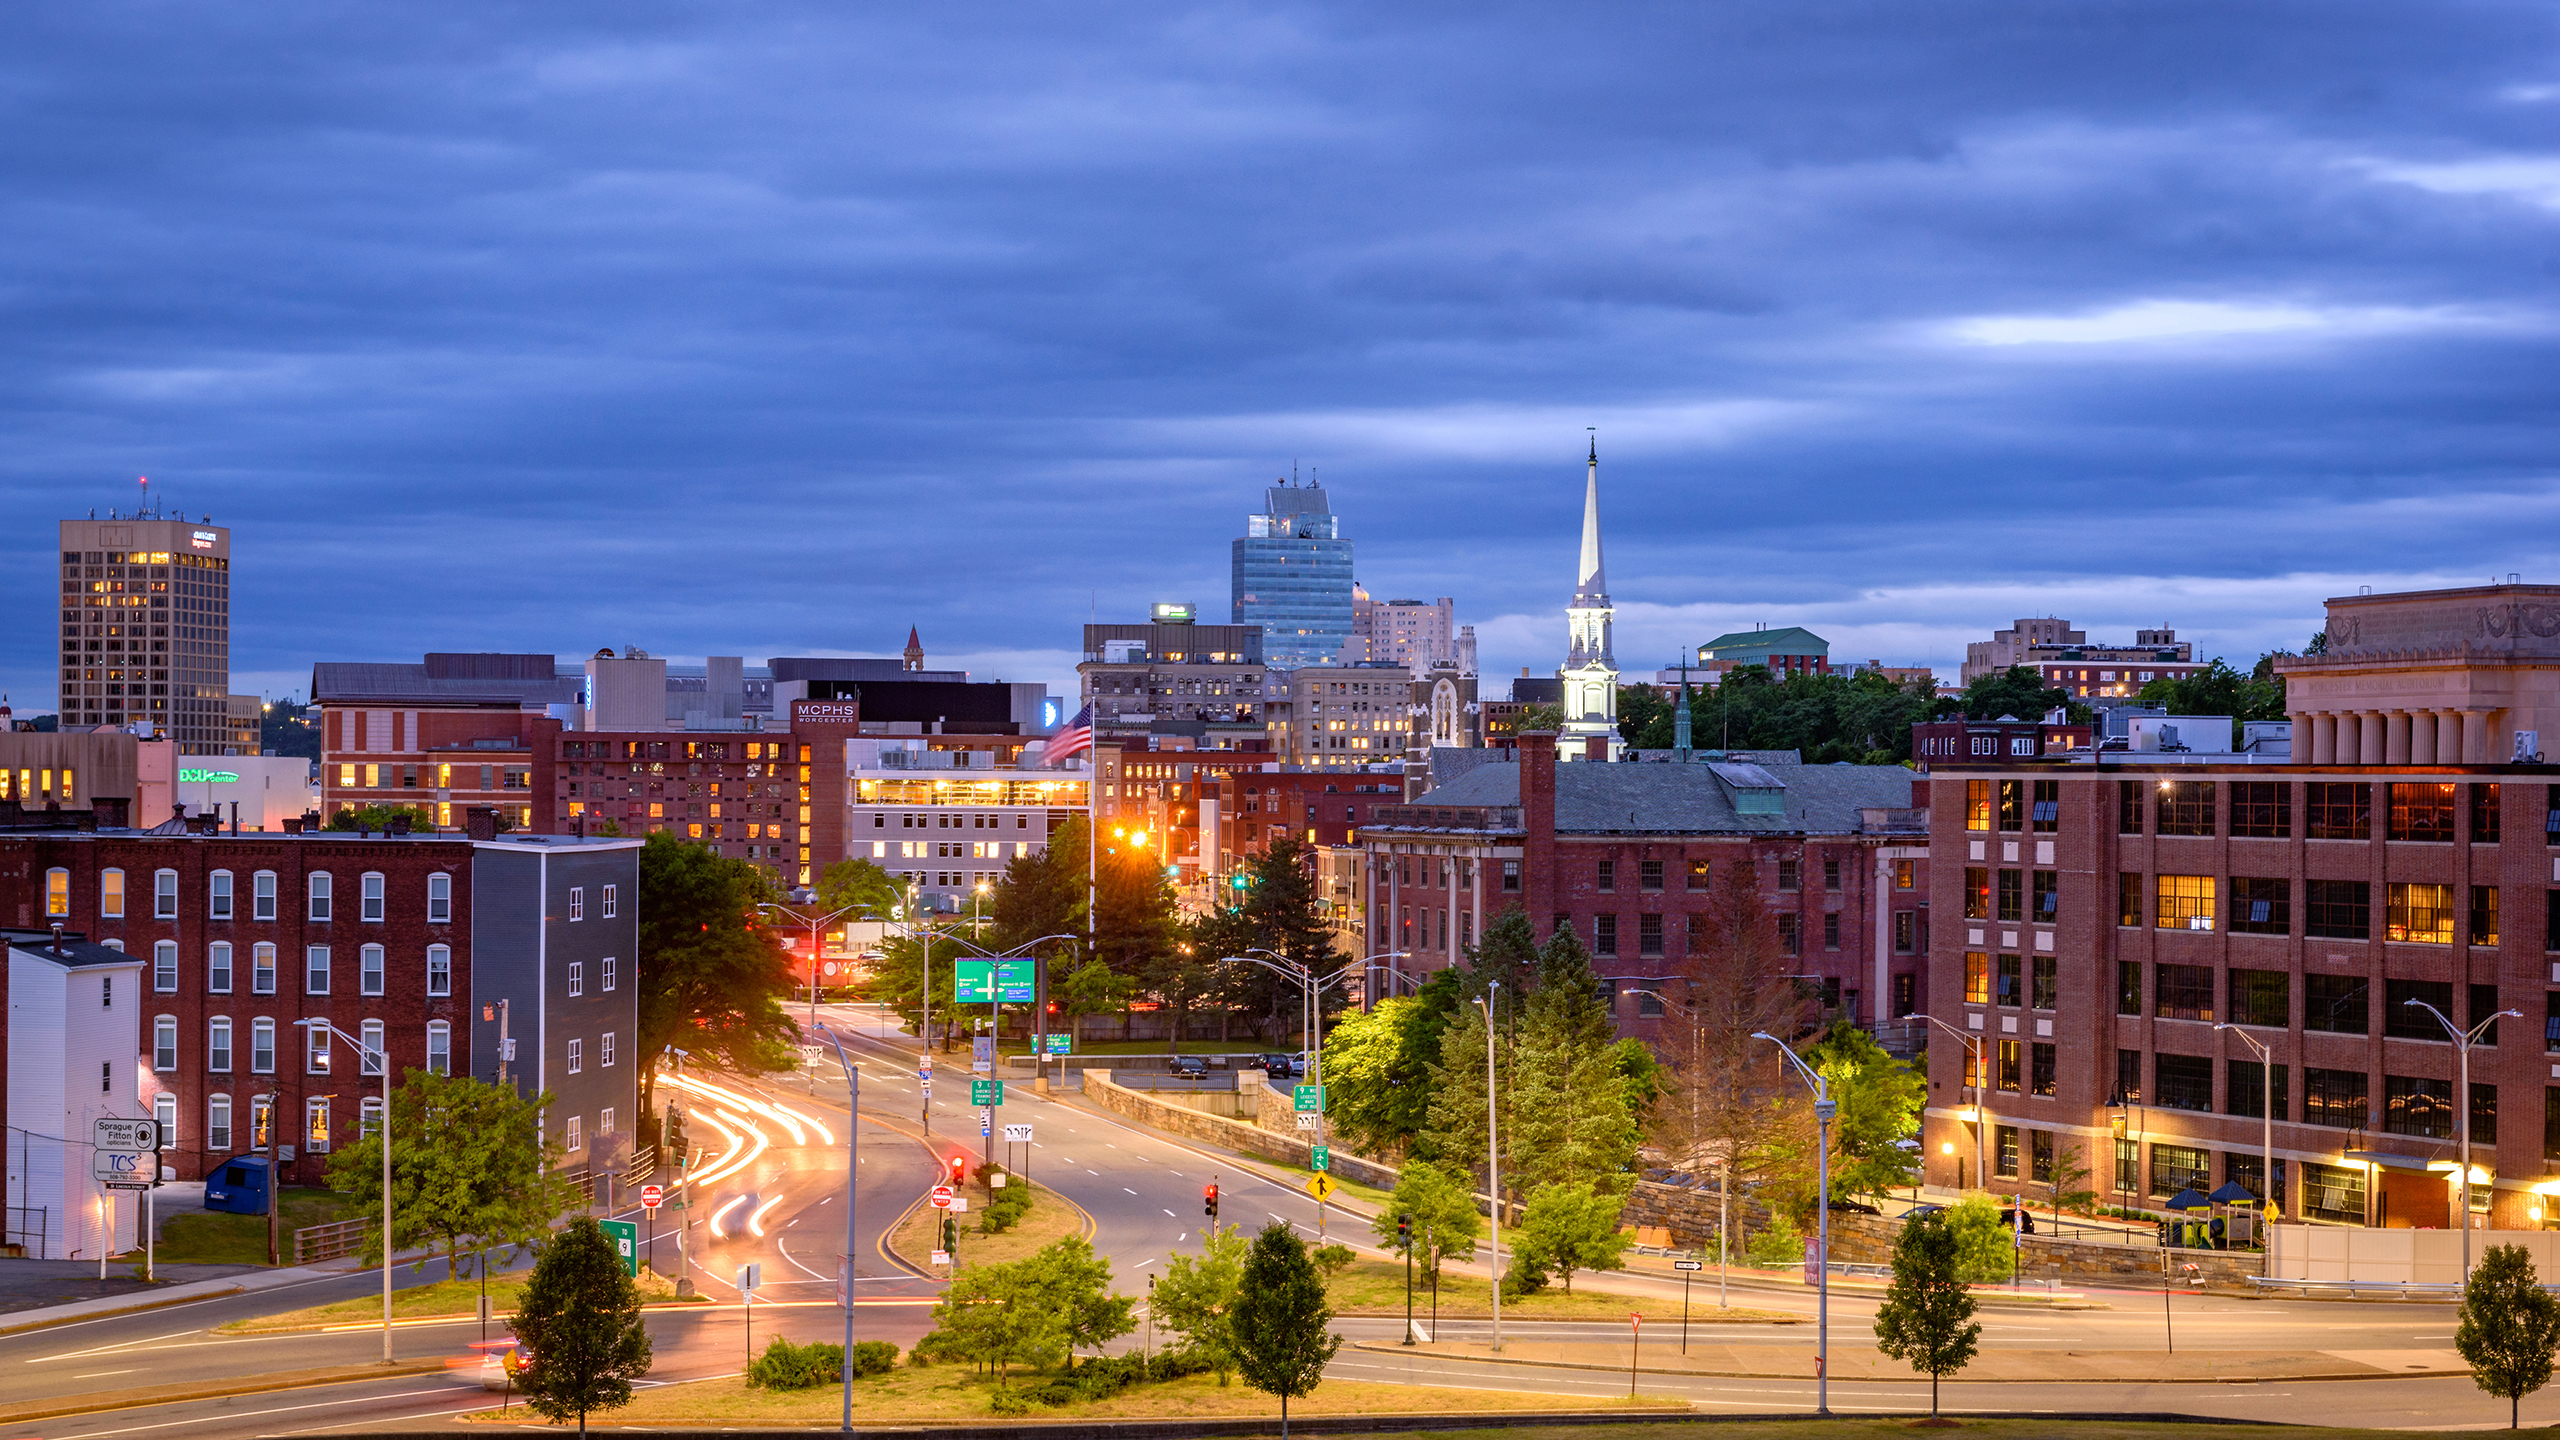 A shot of Worcester at night.